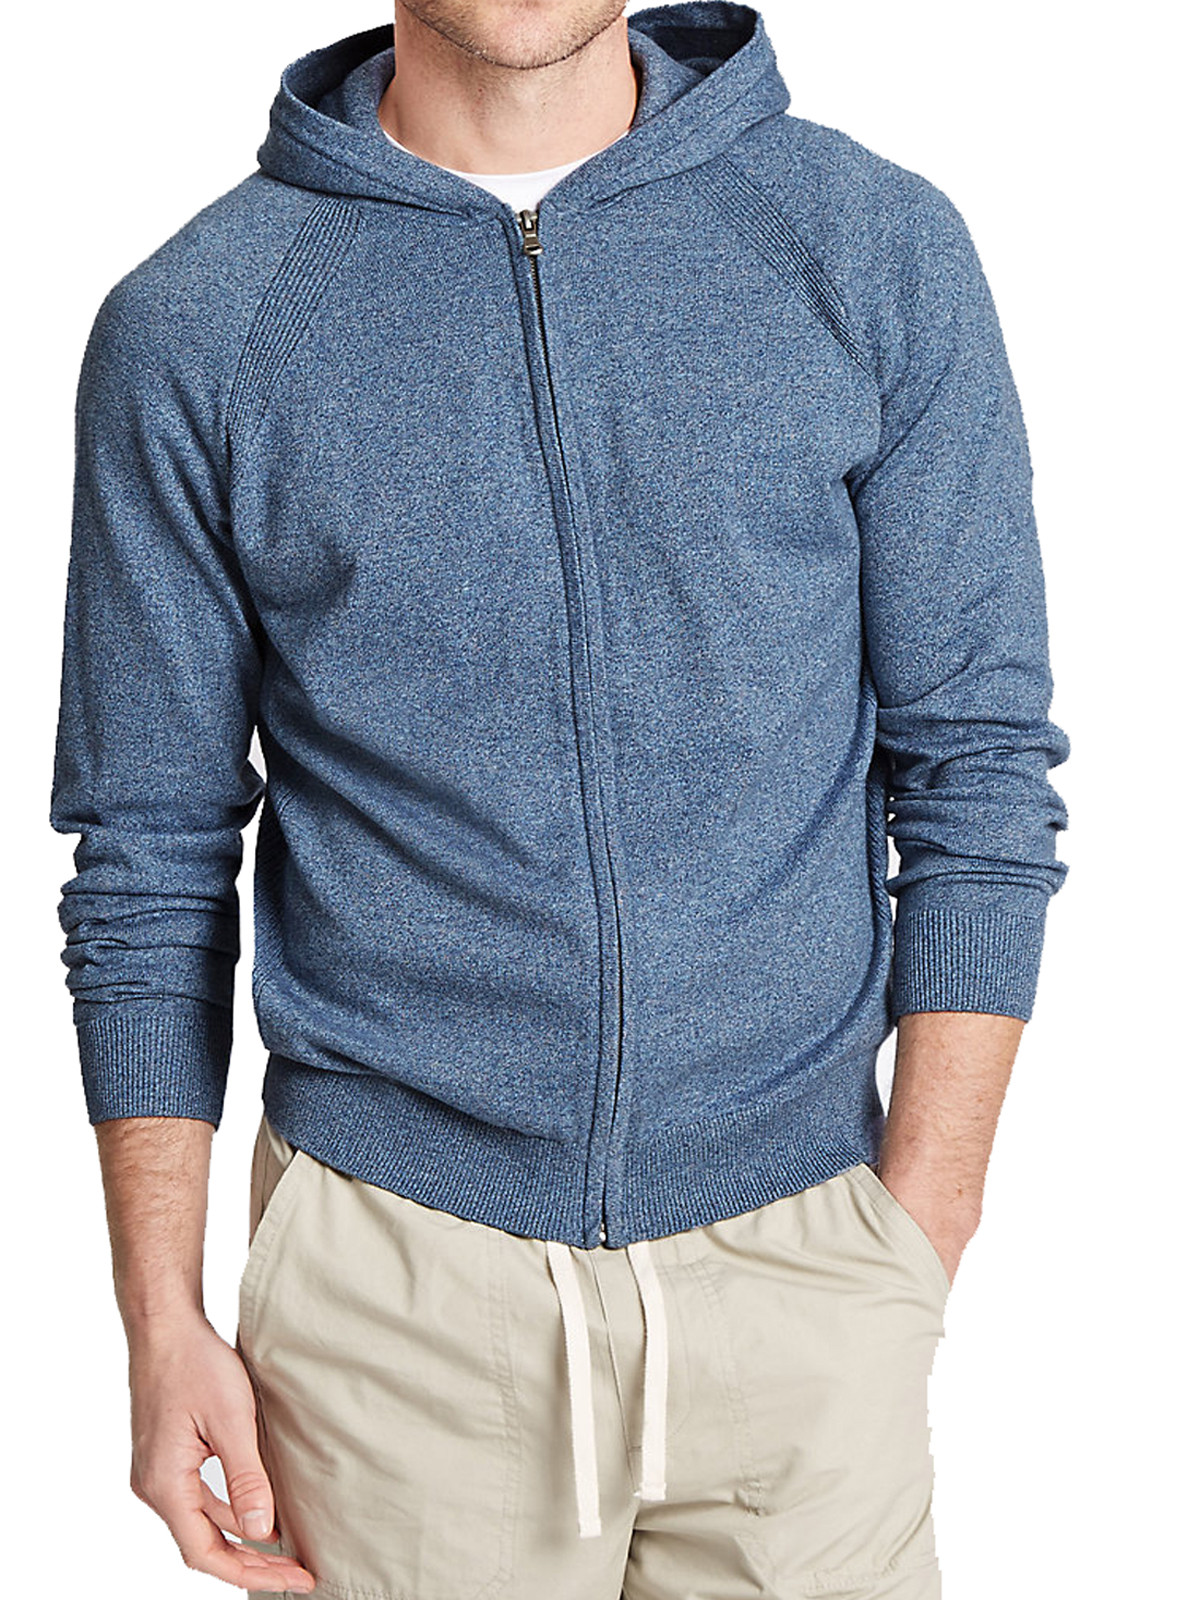 Marks and Spencer - - M&5 BLUE Cotton Blend Tailored Fit Hooded ...